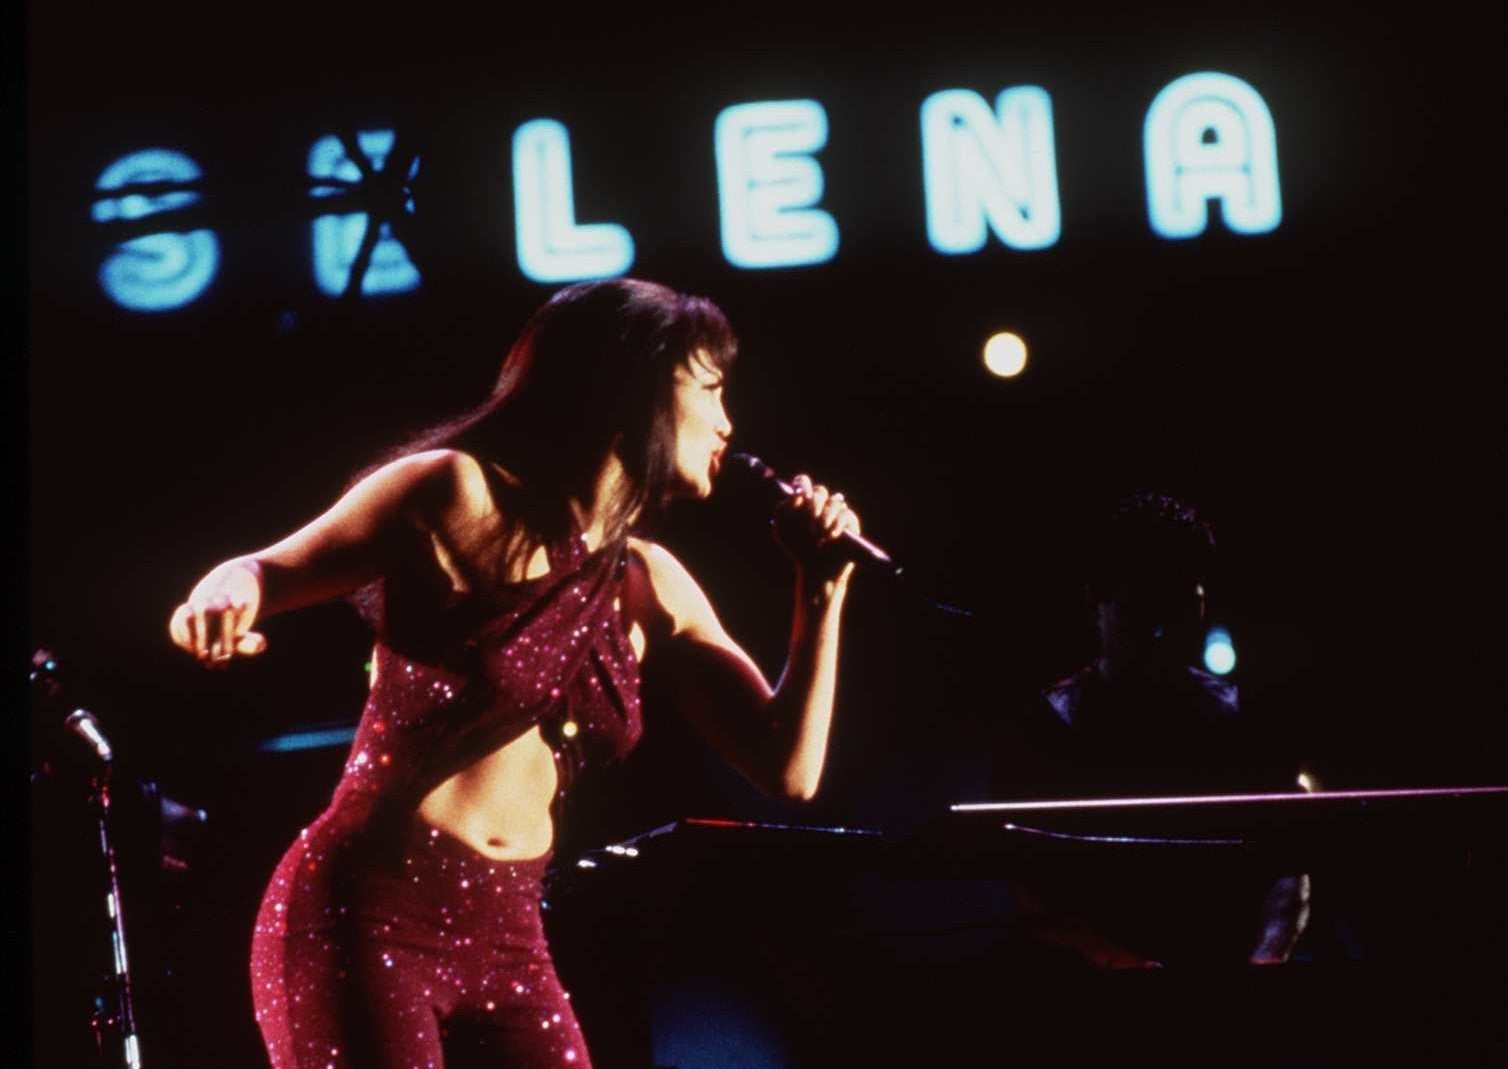 Jennifer performs in Selena&#x27;s iconic purple outfit with the cutout midriff 